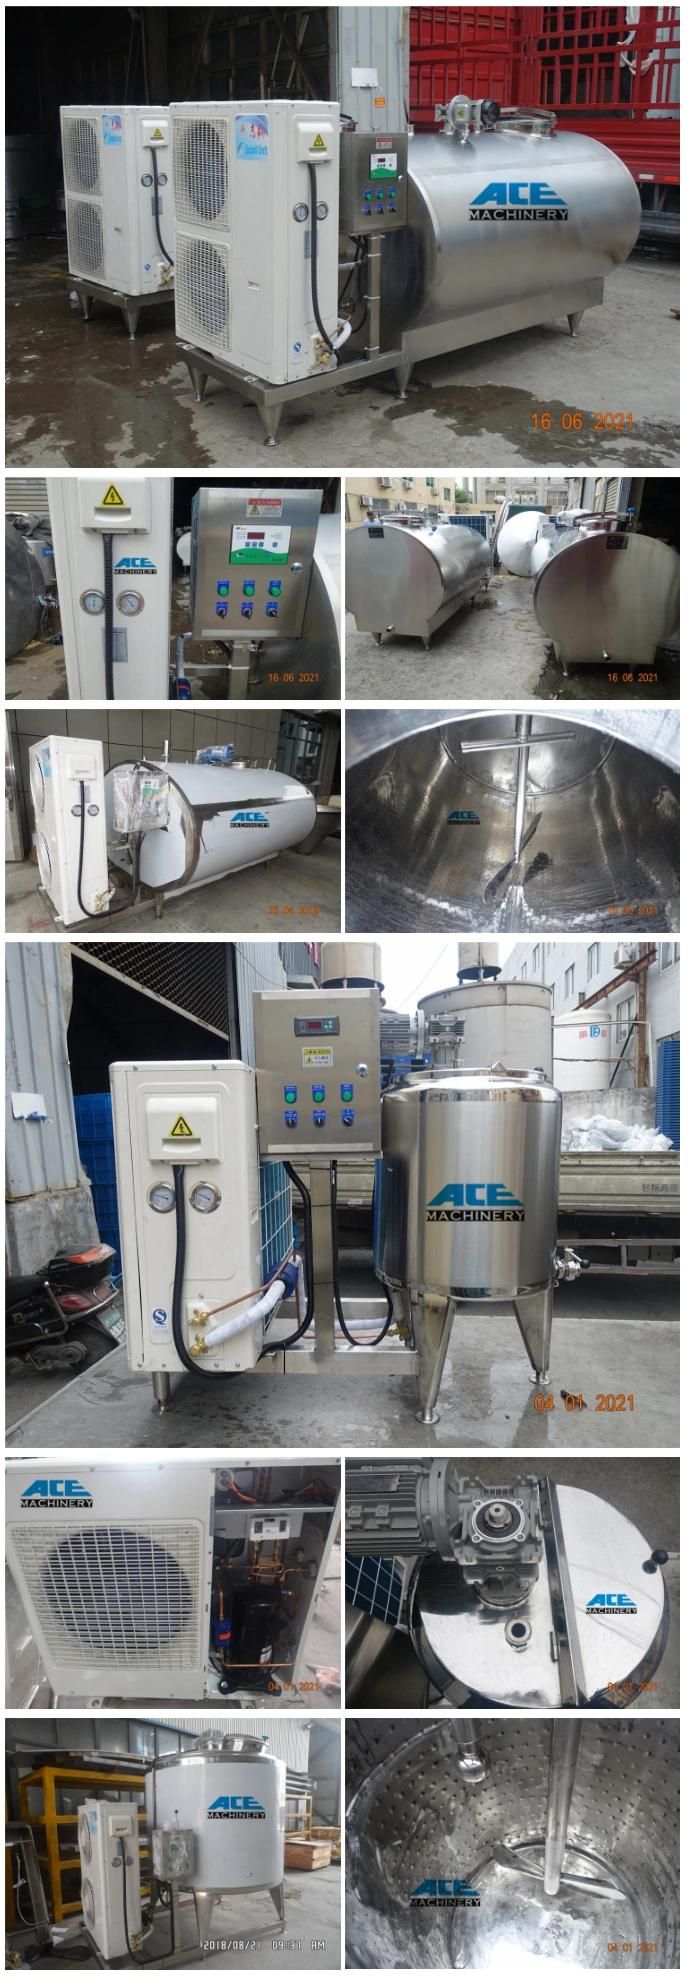 Price of High Quality Stainless Steel Milk Cooling Mixing Storage Tank